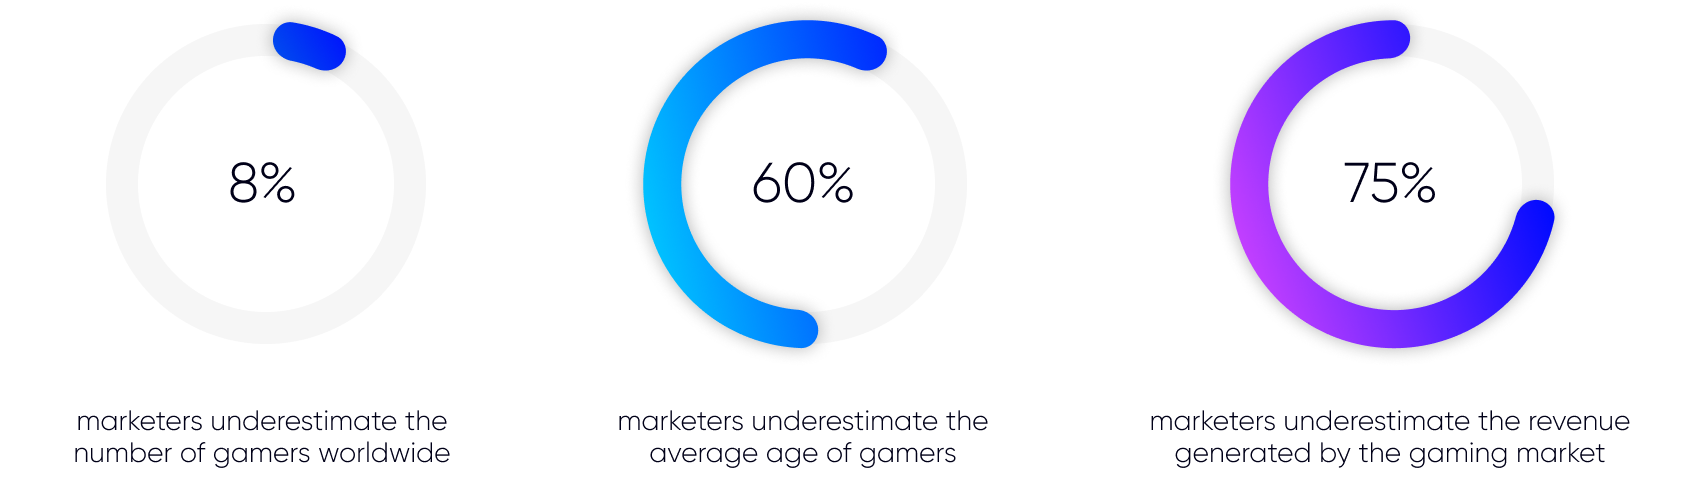 marketers and in-game advertising states